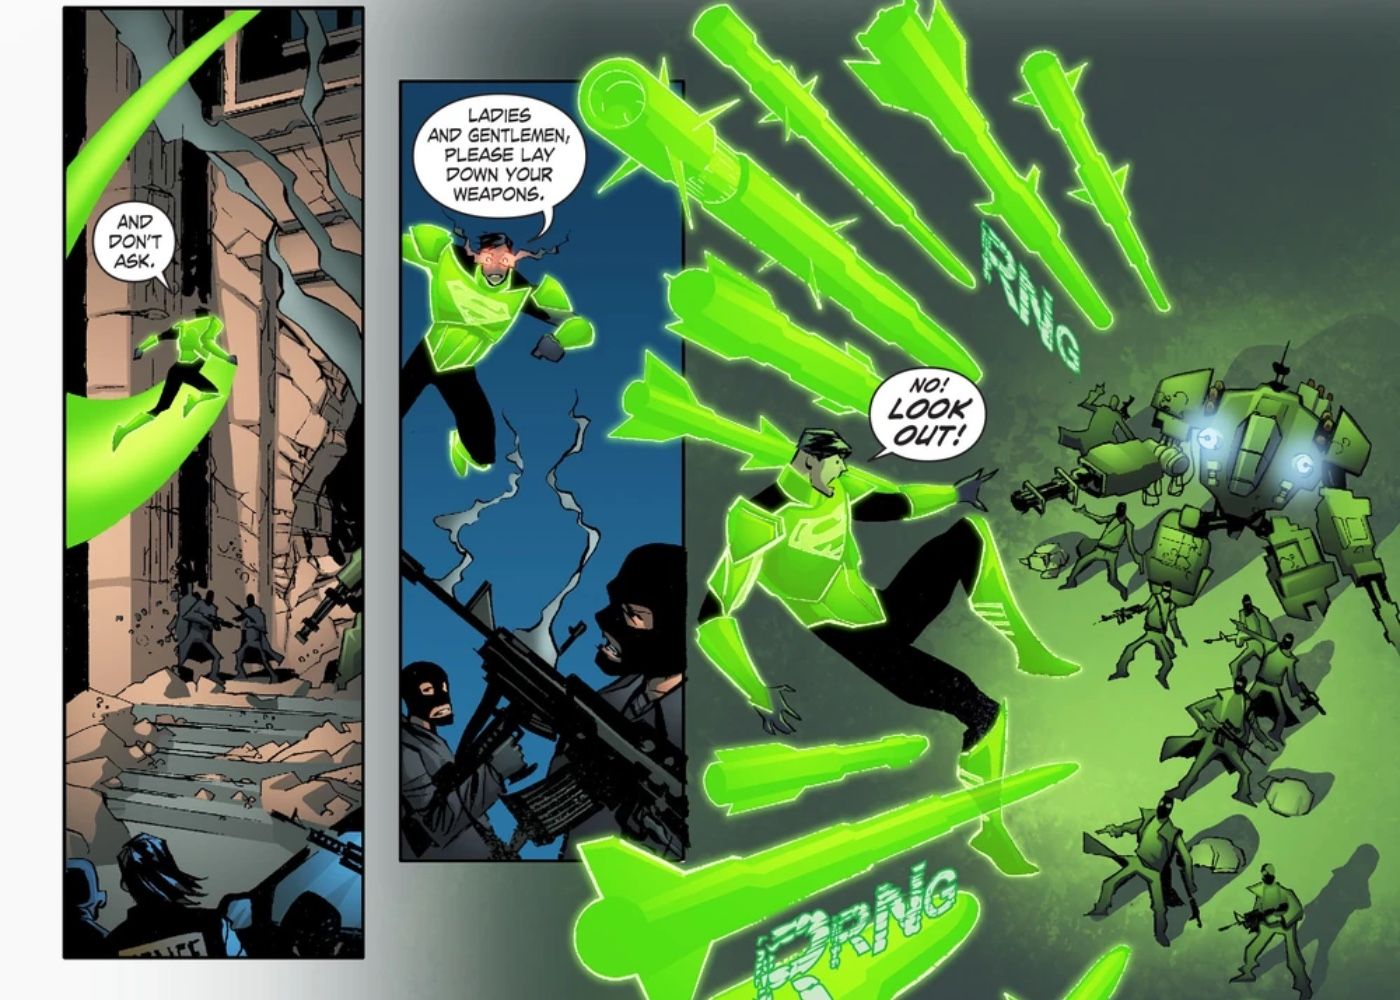 Smallville: Lantern, Superman uses a Green Lantern power ring to form constructs.